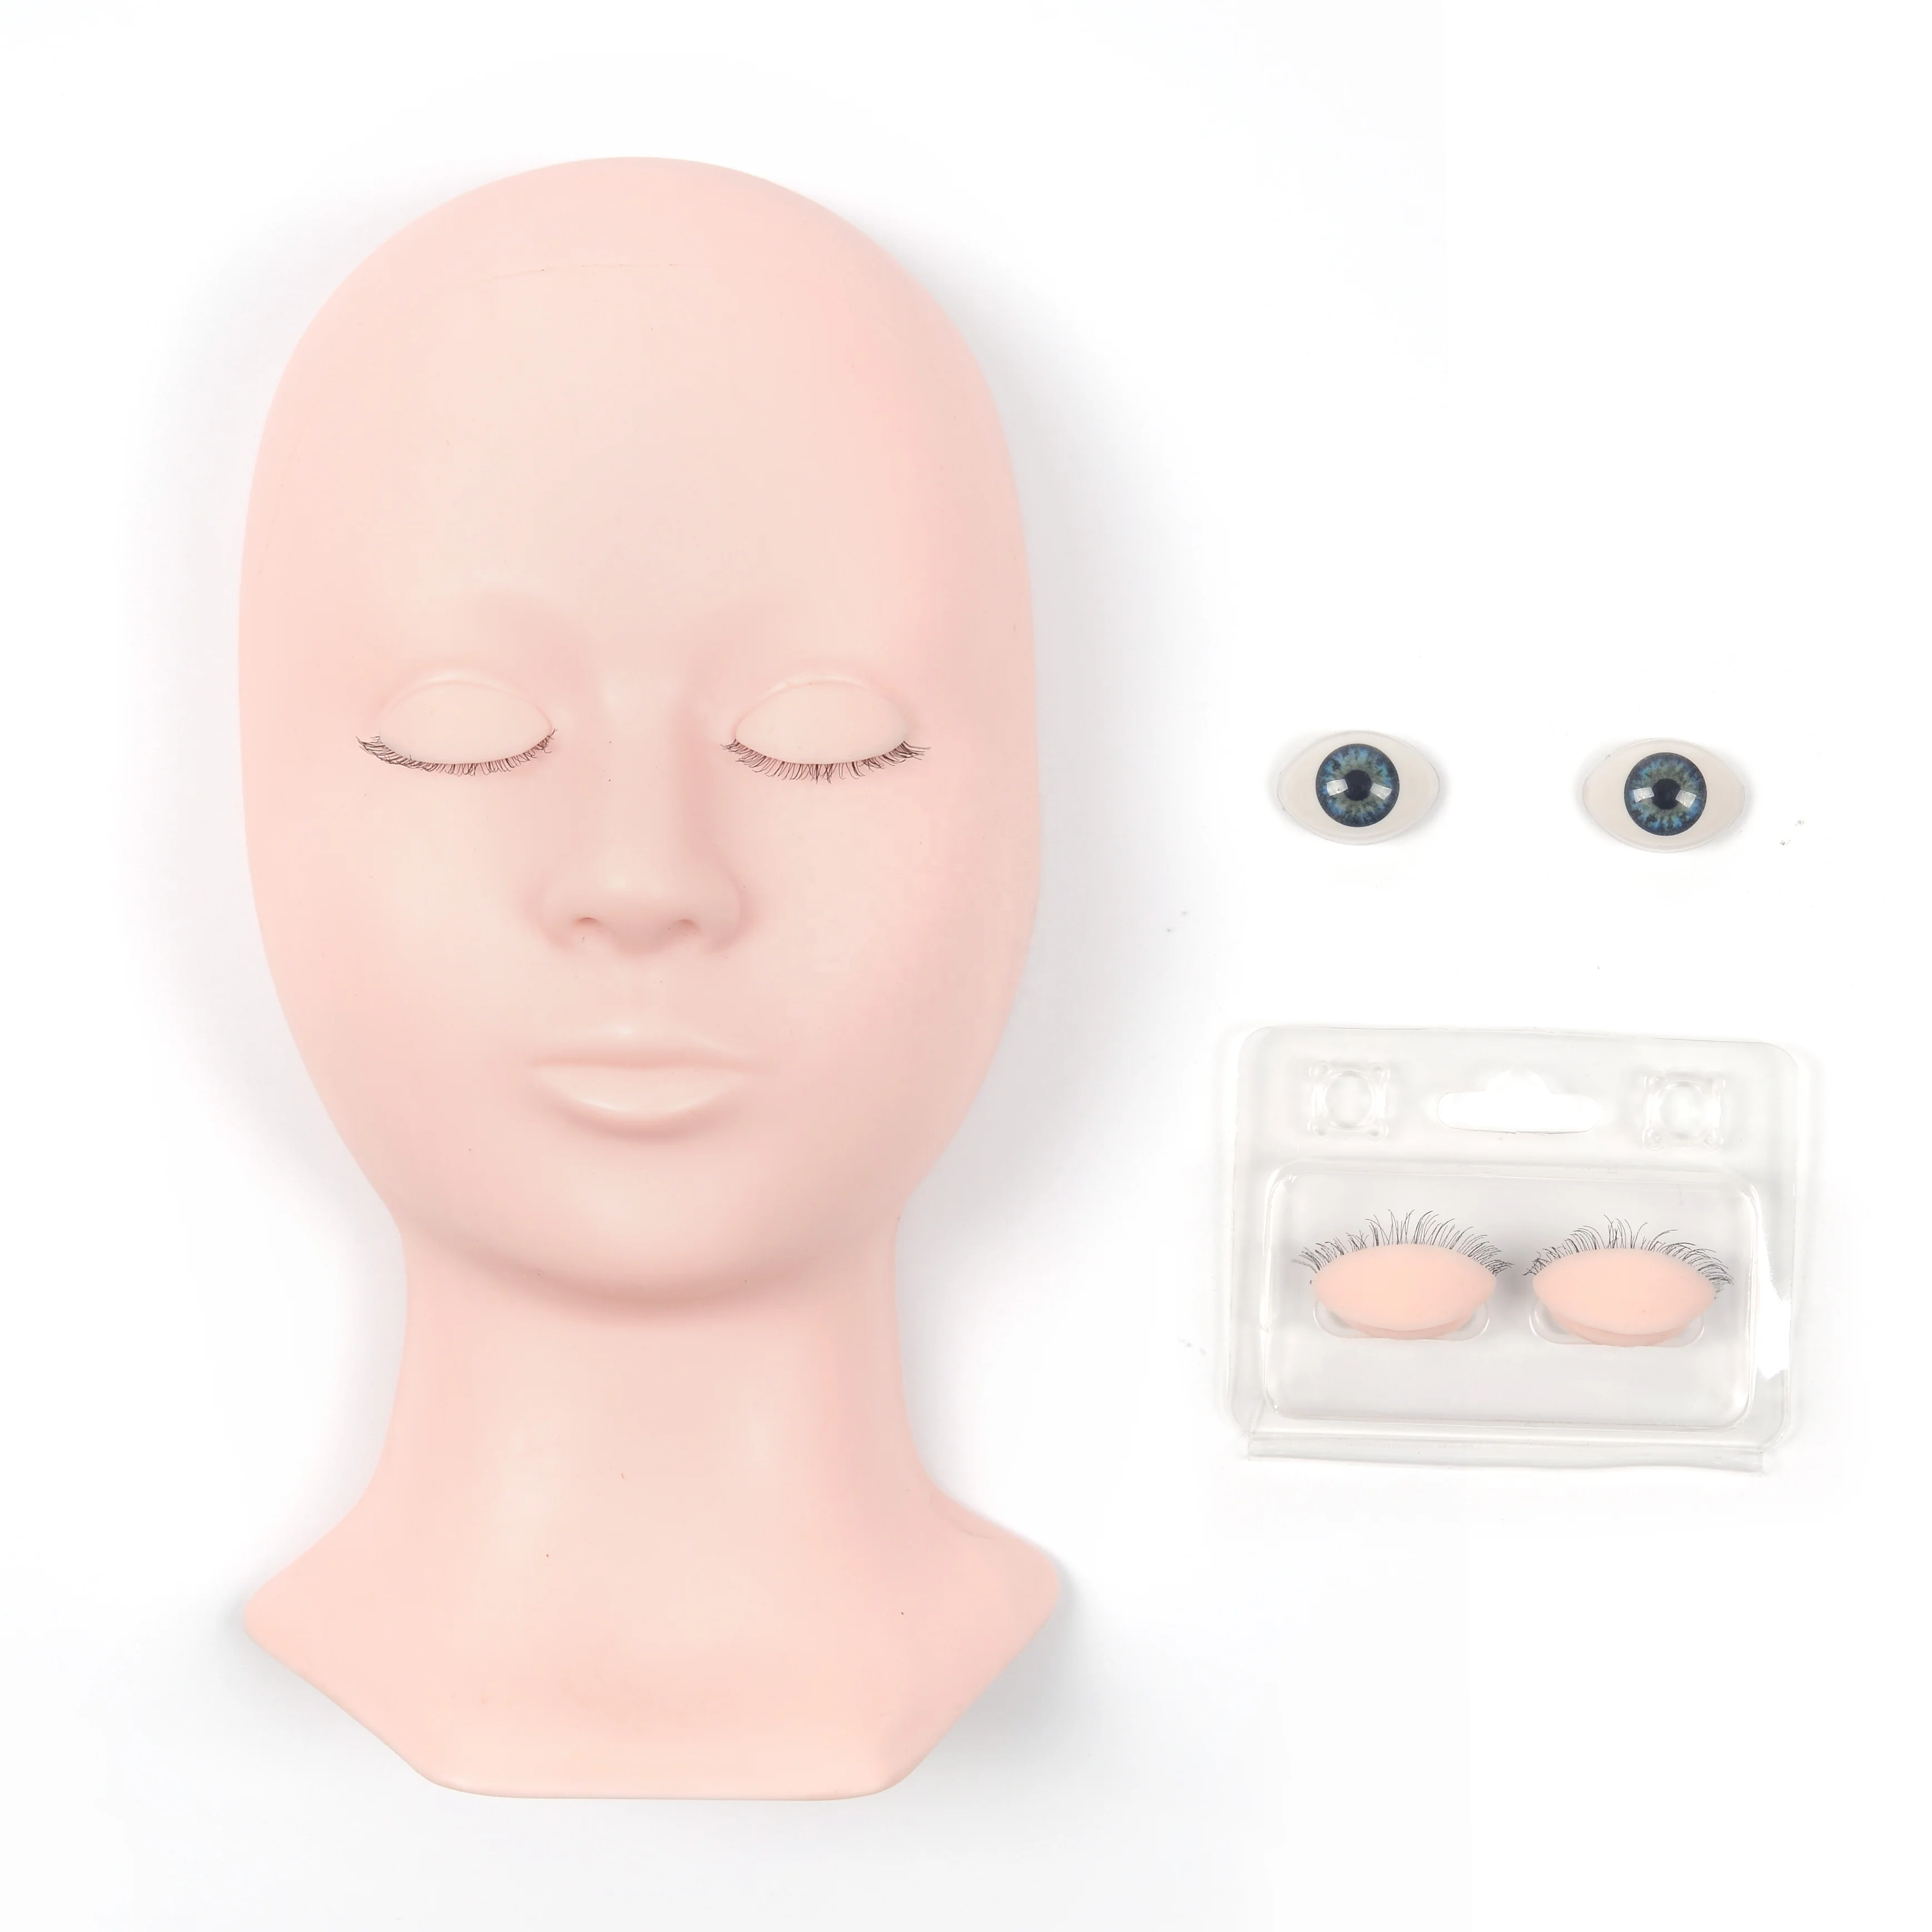 Makeup Practice Face Silicone Head To Training Manikin Female Maniquin Eyelashes Kit Mannequin For Lash Extensions